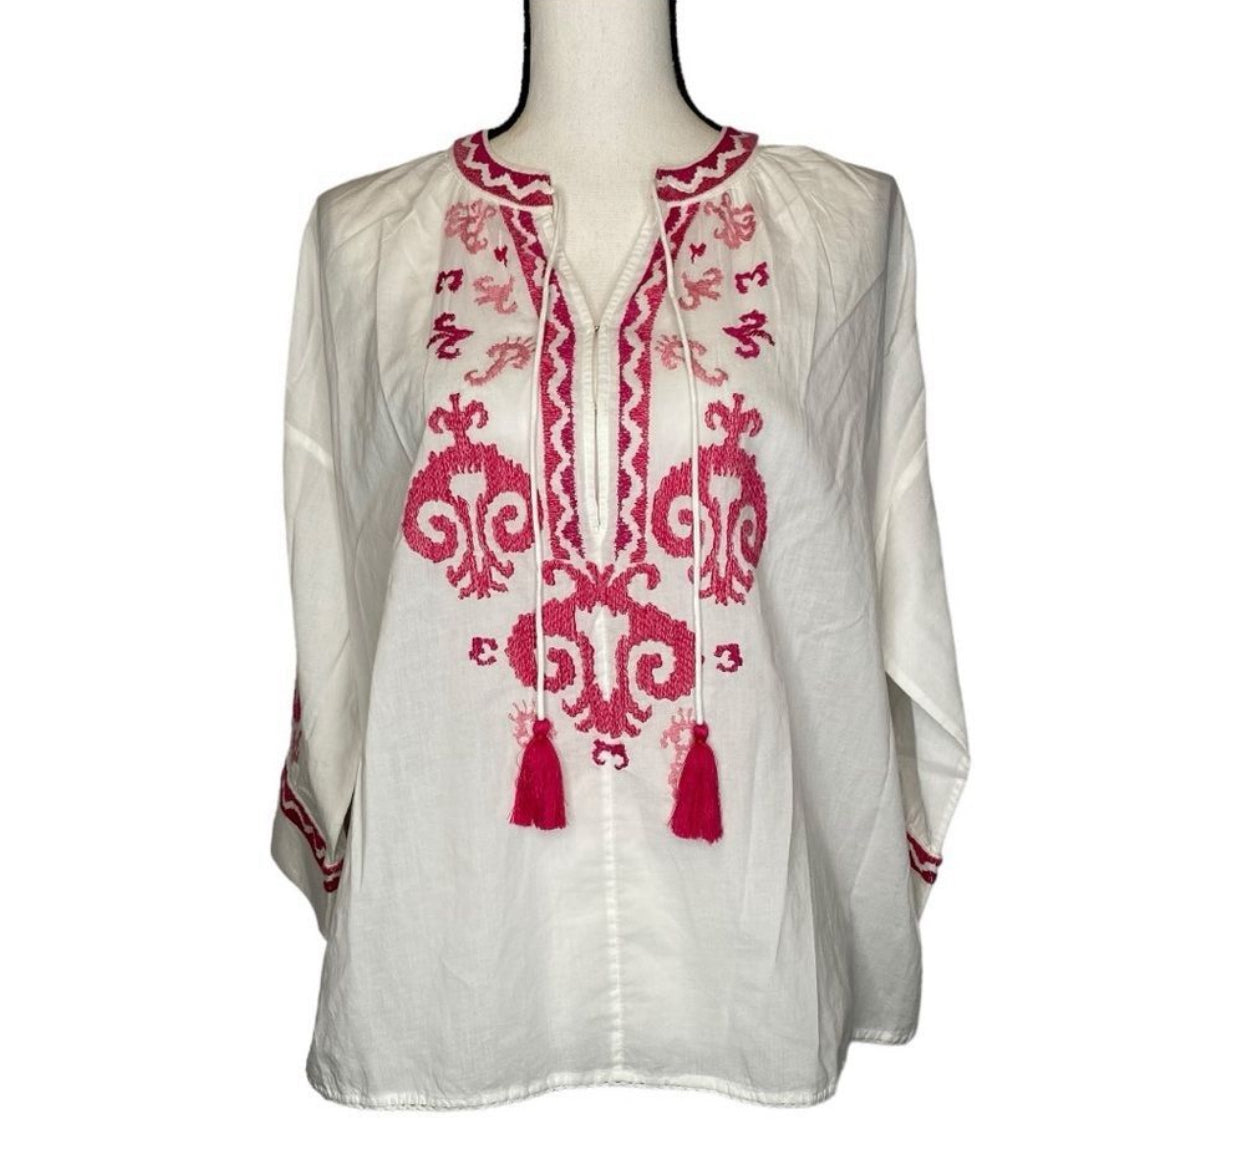 Chico's Easy Peasant Embroidered 3/4 Sleeve Boho Top - Size Large